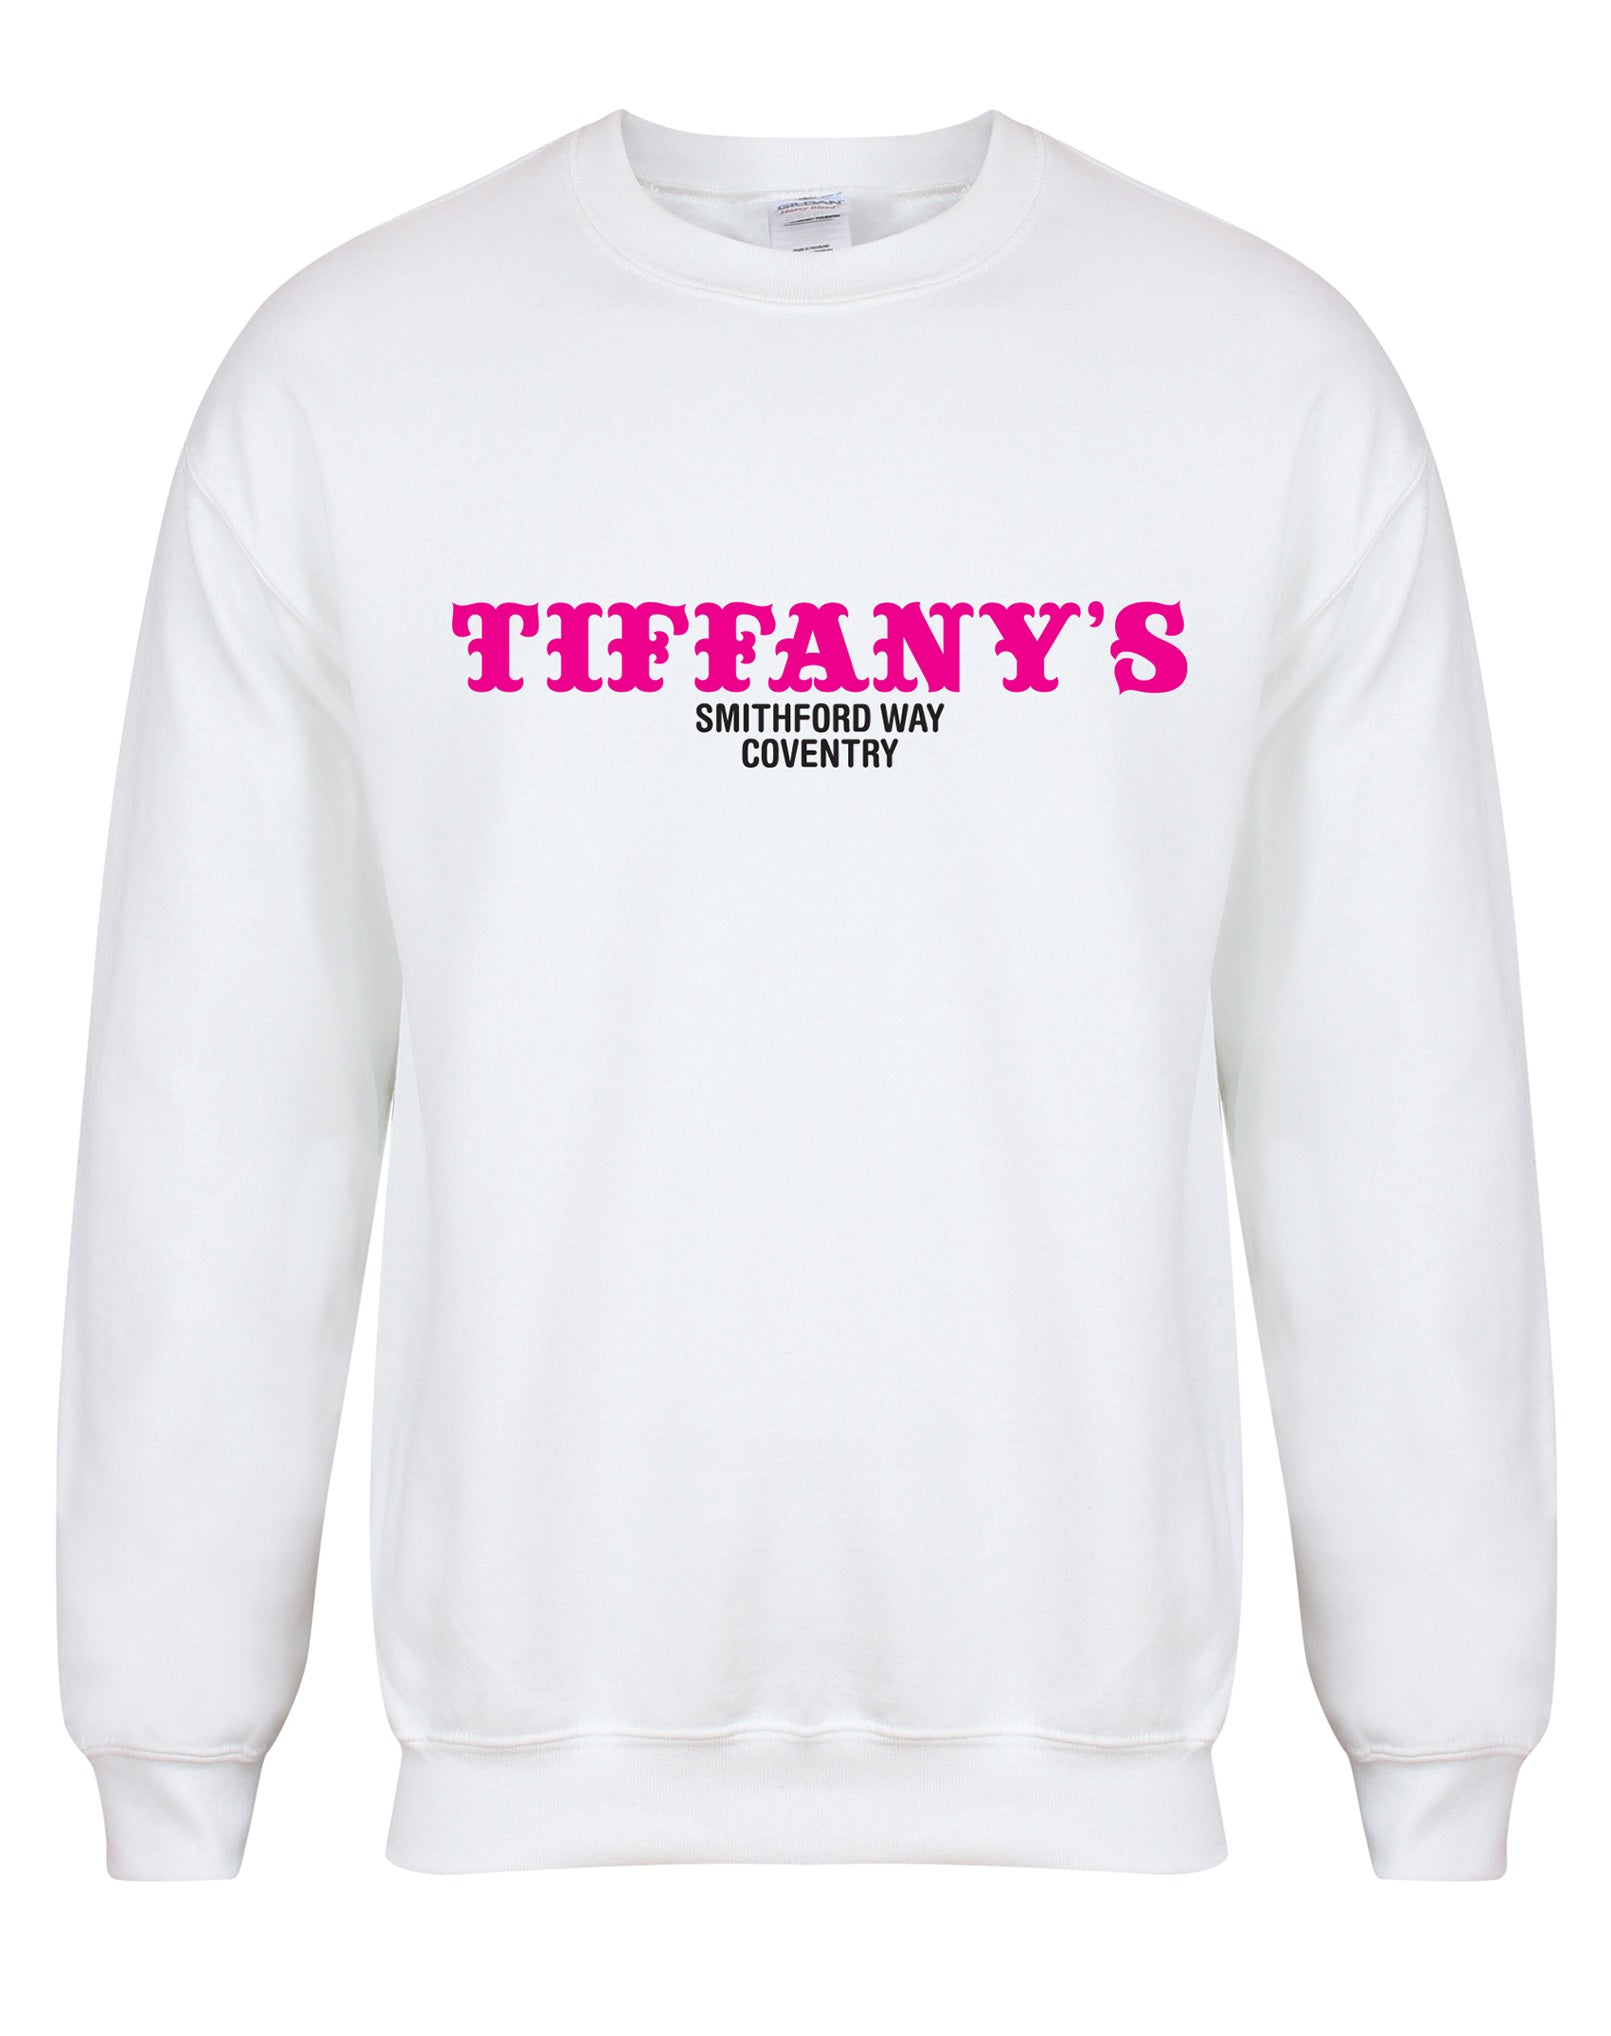 Tiffany's Coventry unisex fit sweatshirt - various colours - Dirty Stop Outs